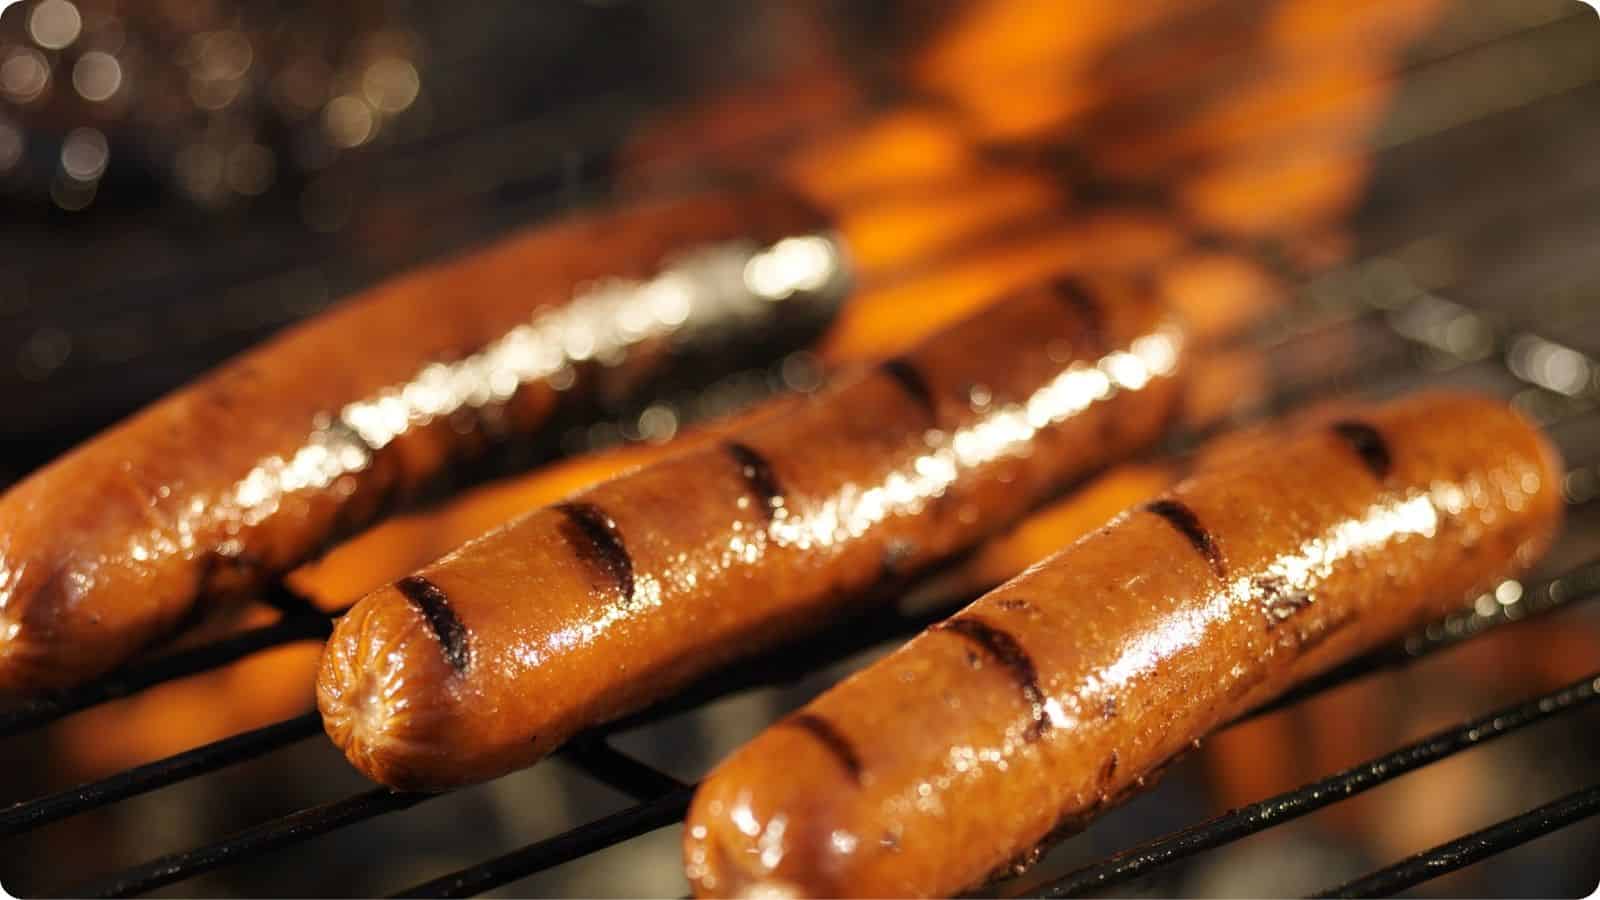 Sizzling grilled hotdogs.